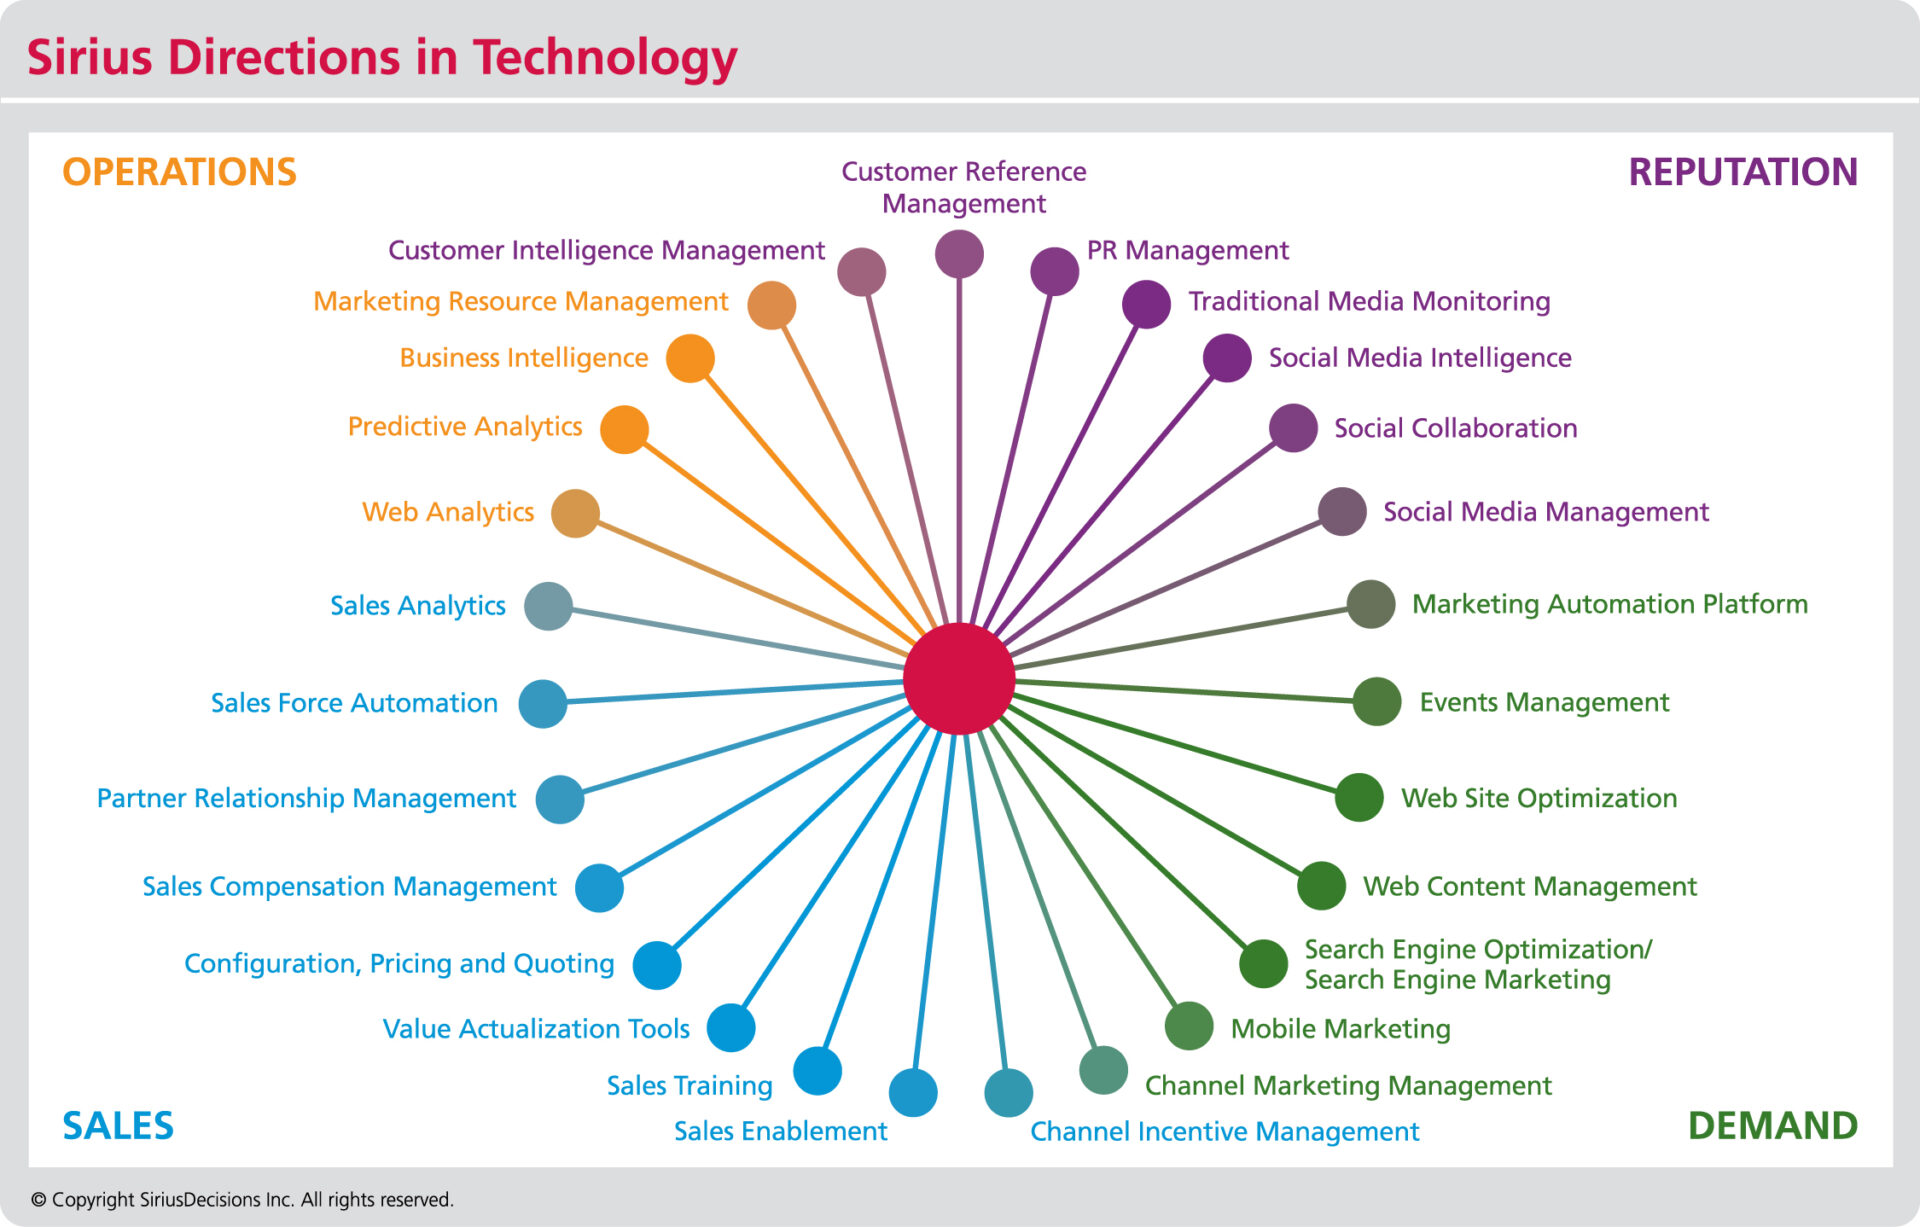 The SiriusDecisions Directions in Technology Model